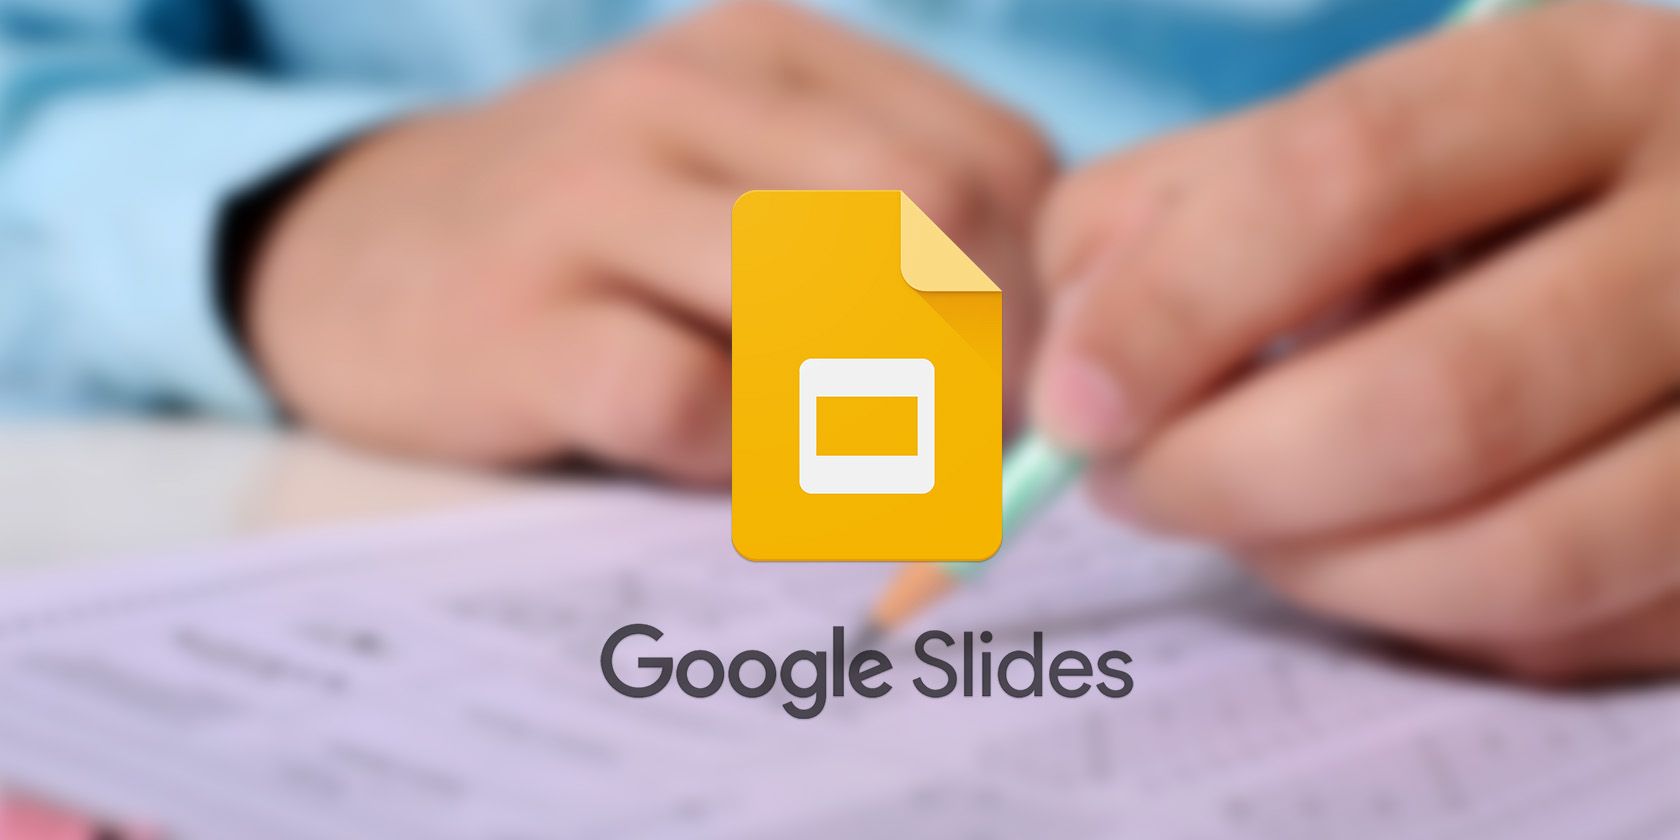 How to Create an Interactive Quiz in Google Slides